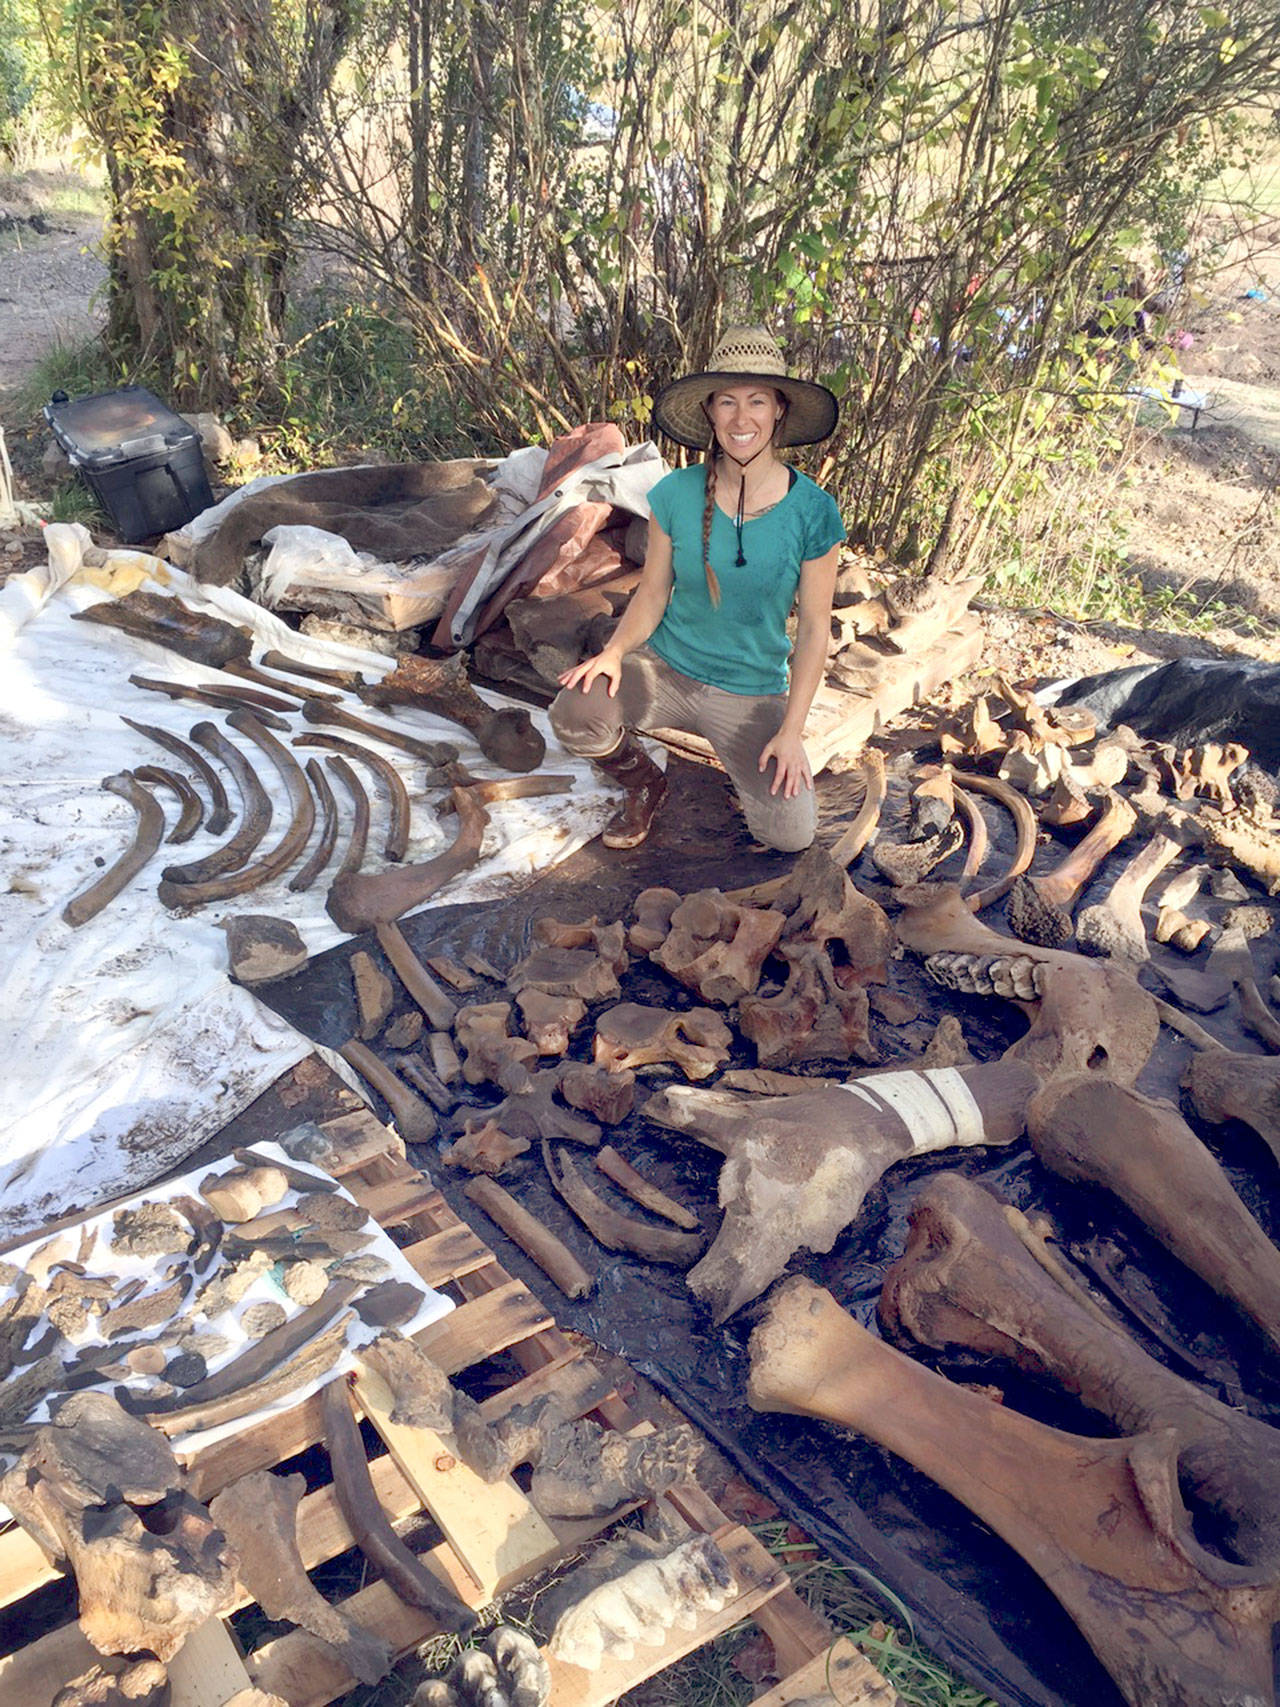 Windward School teacher Elisa Weiss ends a week of discovery after working with 80 students and parents to dig up mastodon bones. The bones were found in a farmer’s field in Chimacum.